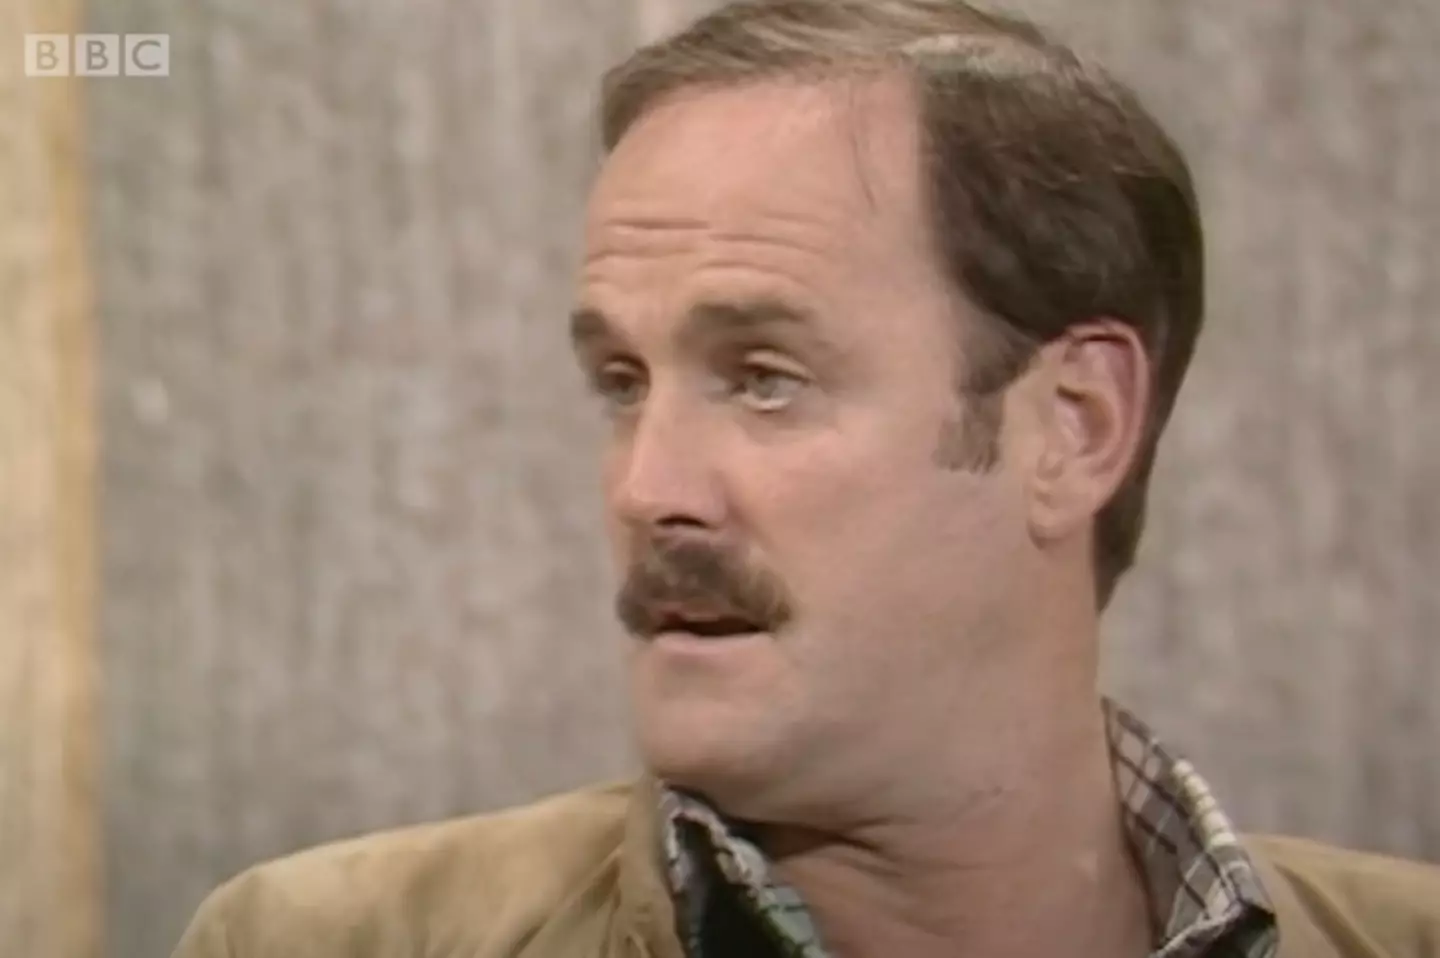 John Cleese has always been open about his opinions.